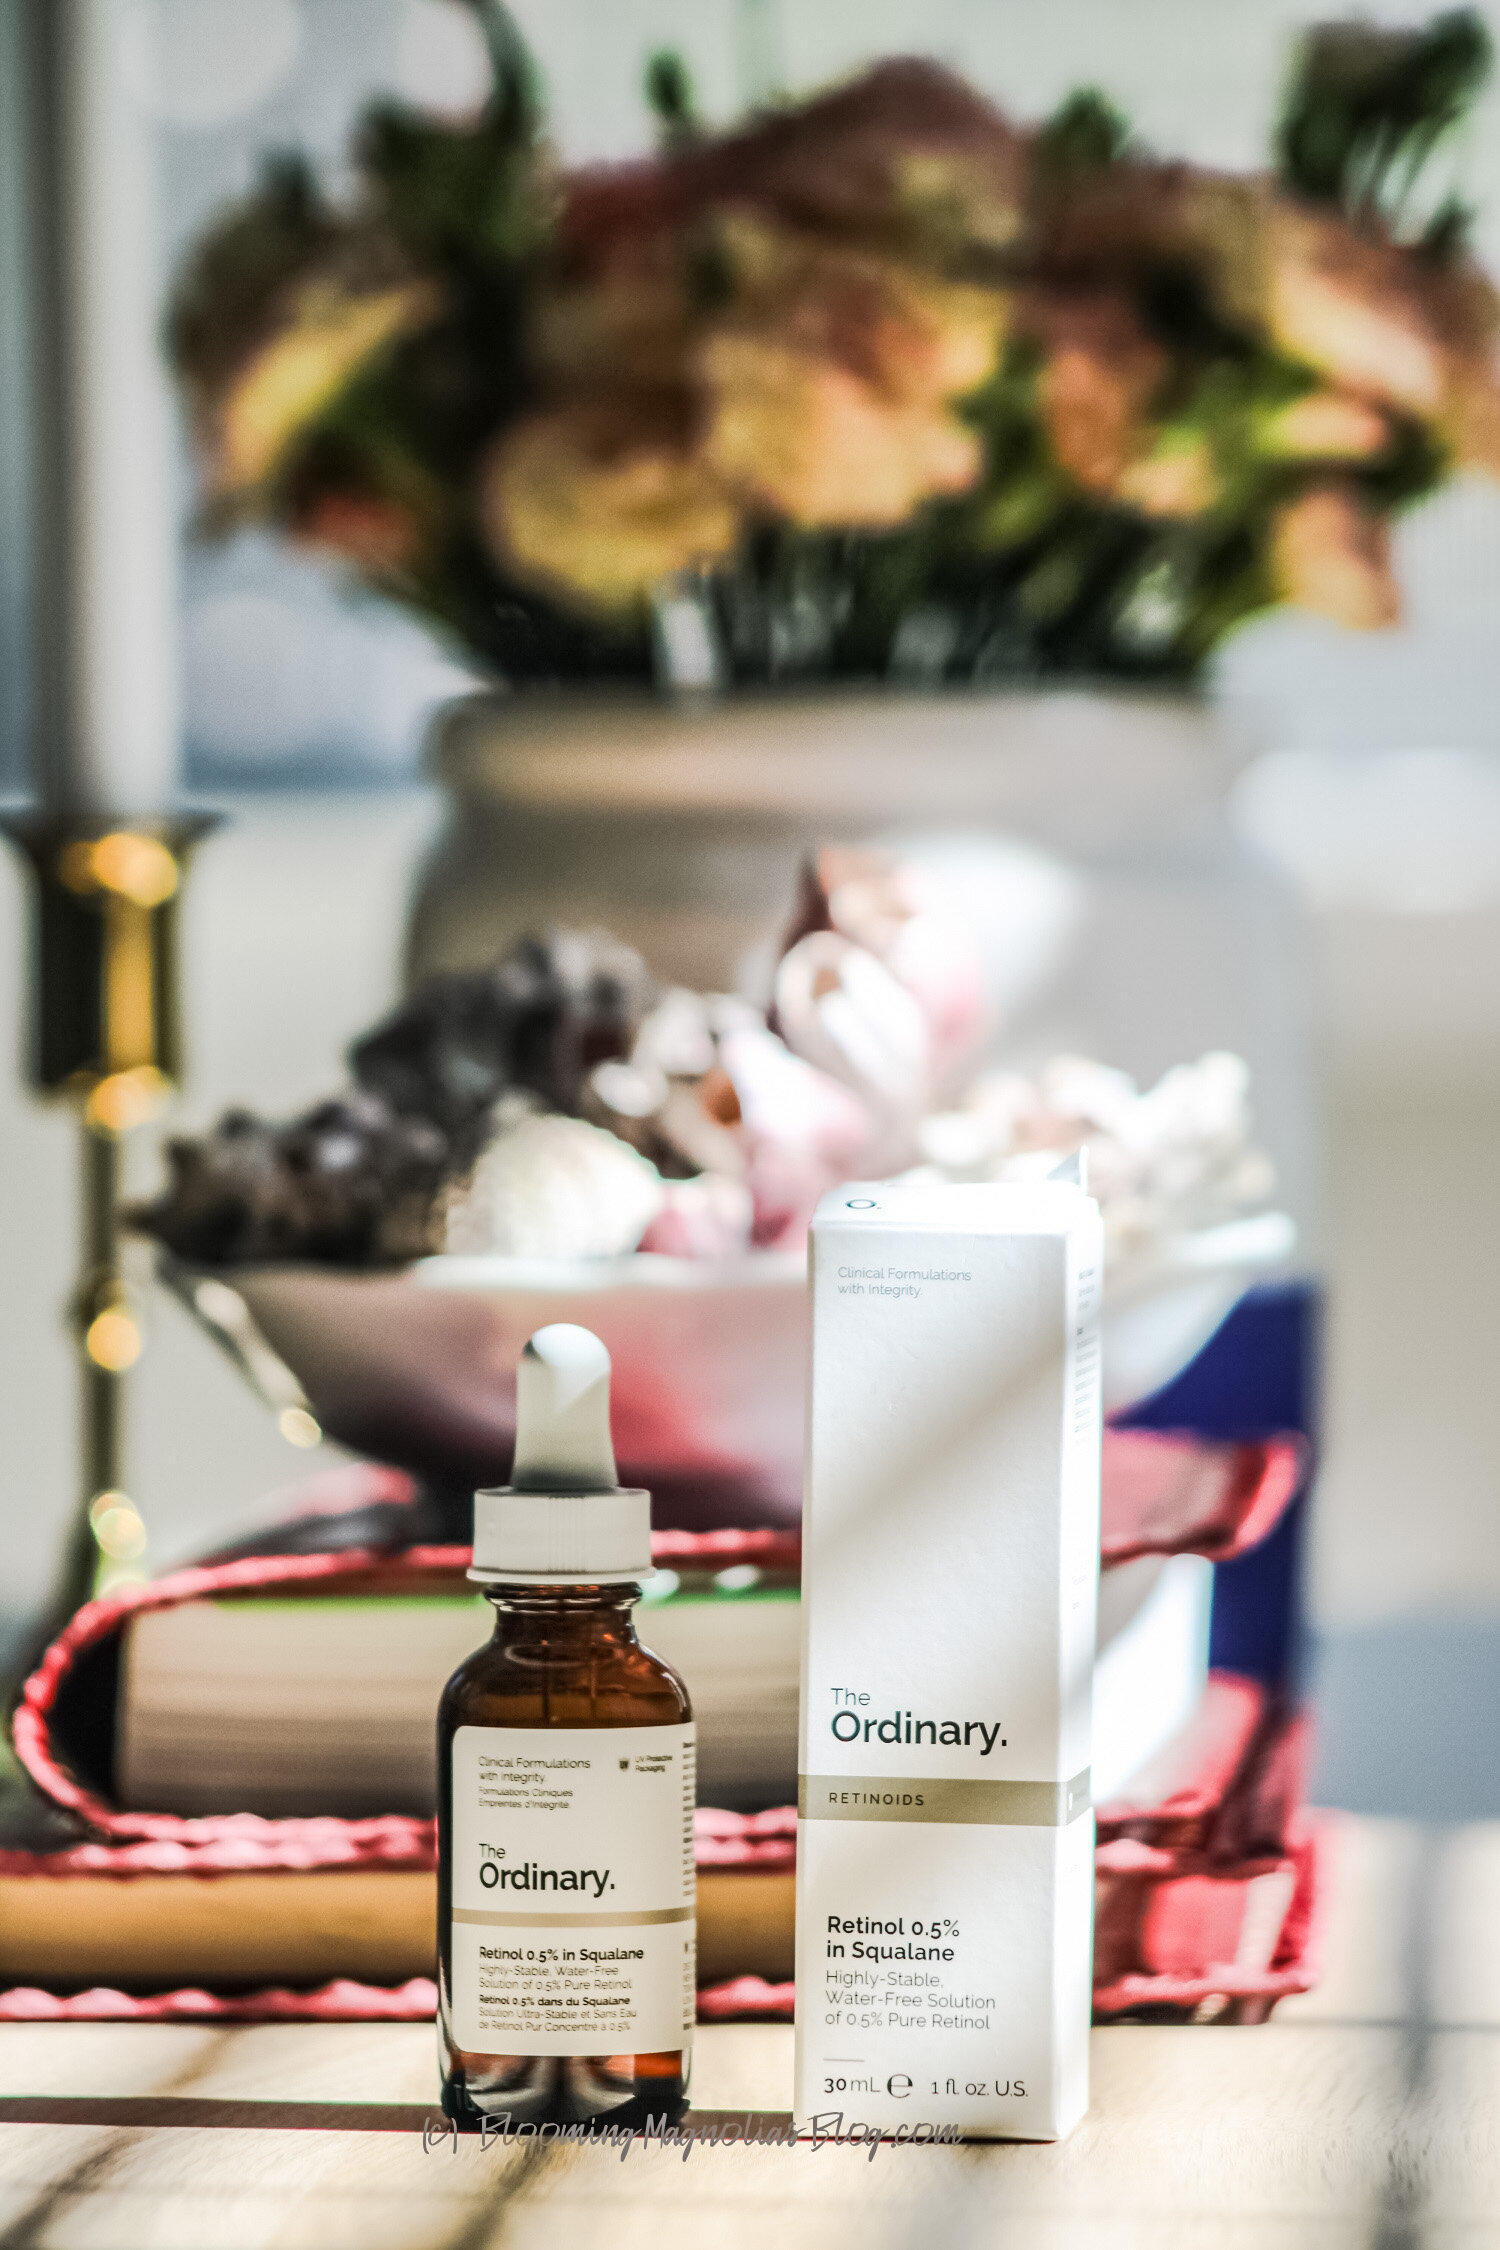 The Retinol 0.5% in Squalane review — Blooming Magnolias Blog